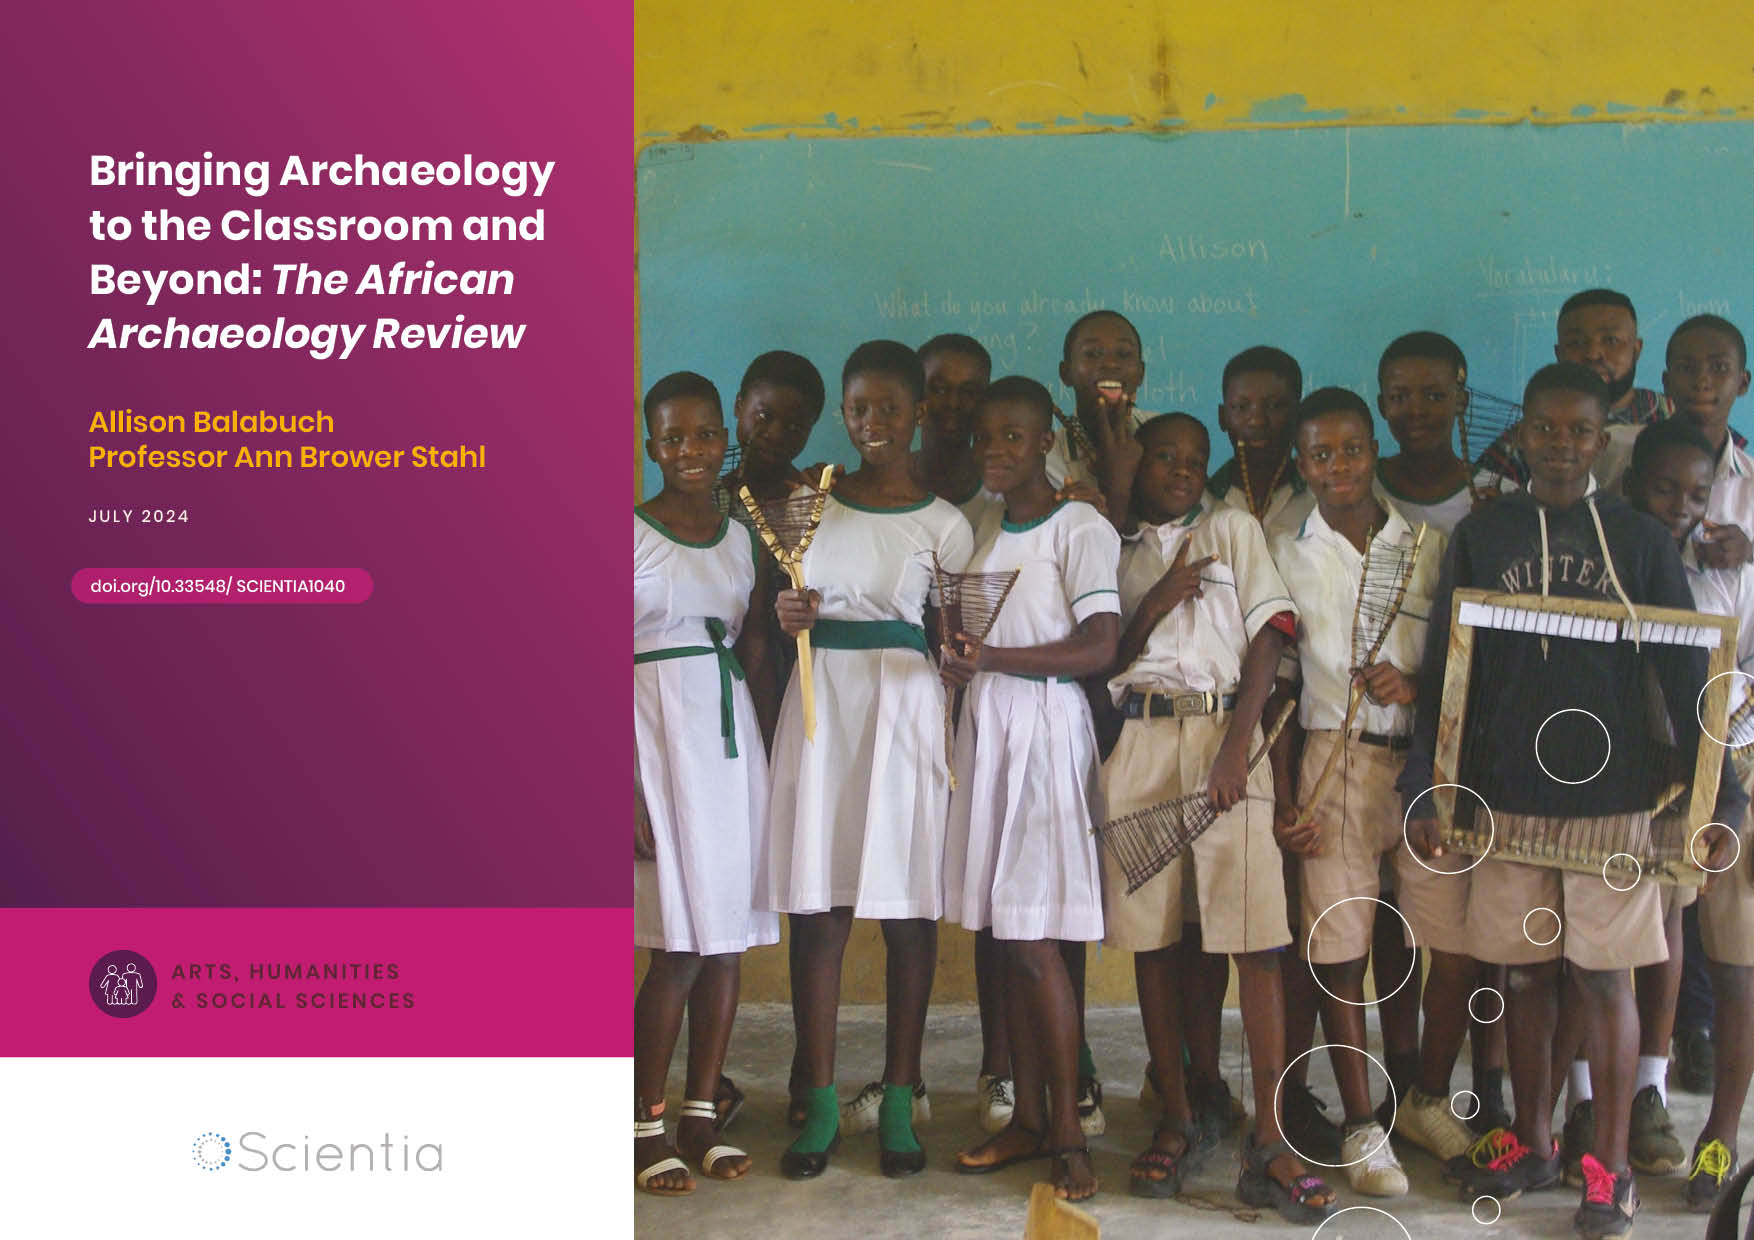 Allison Balabuch – Professor Ann Brower Stahl | Bringing Archaeology to the Classroom and Beyond: The African Archaeology Review